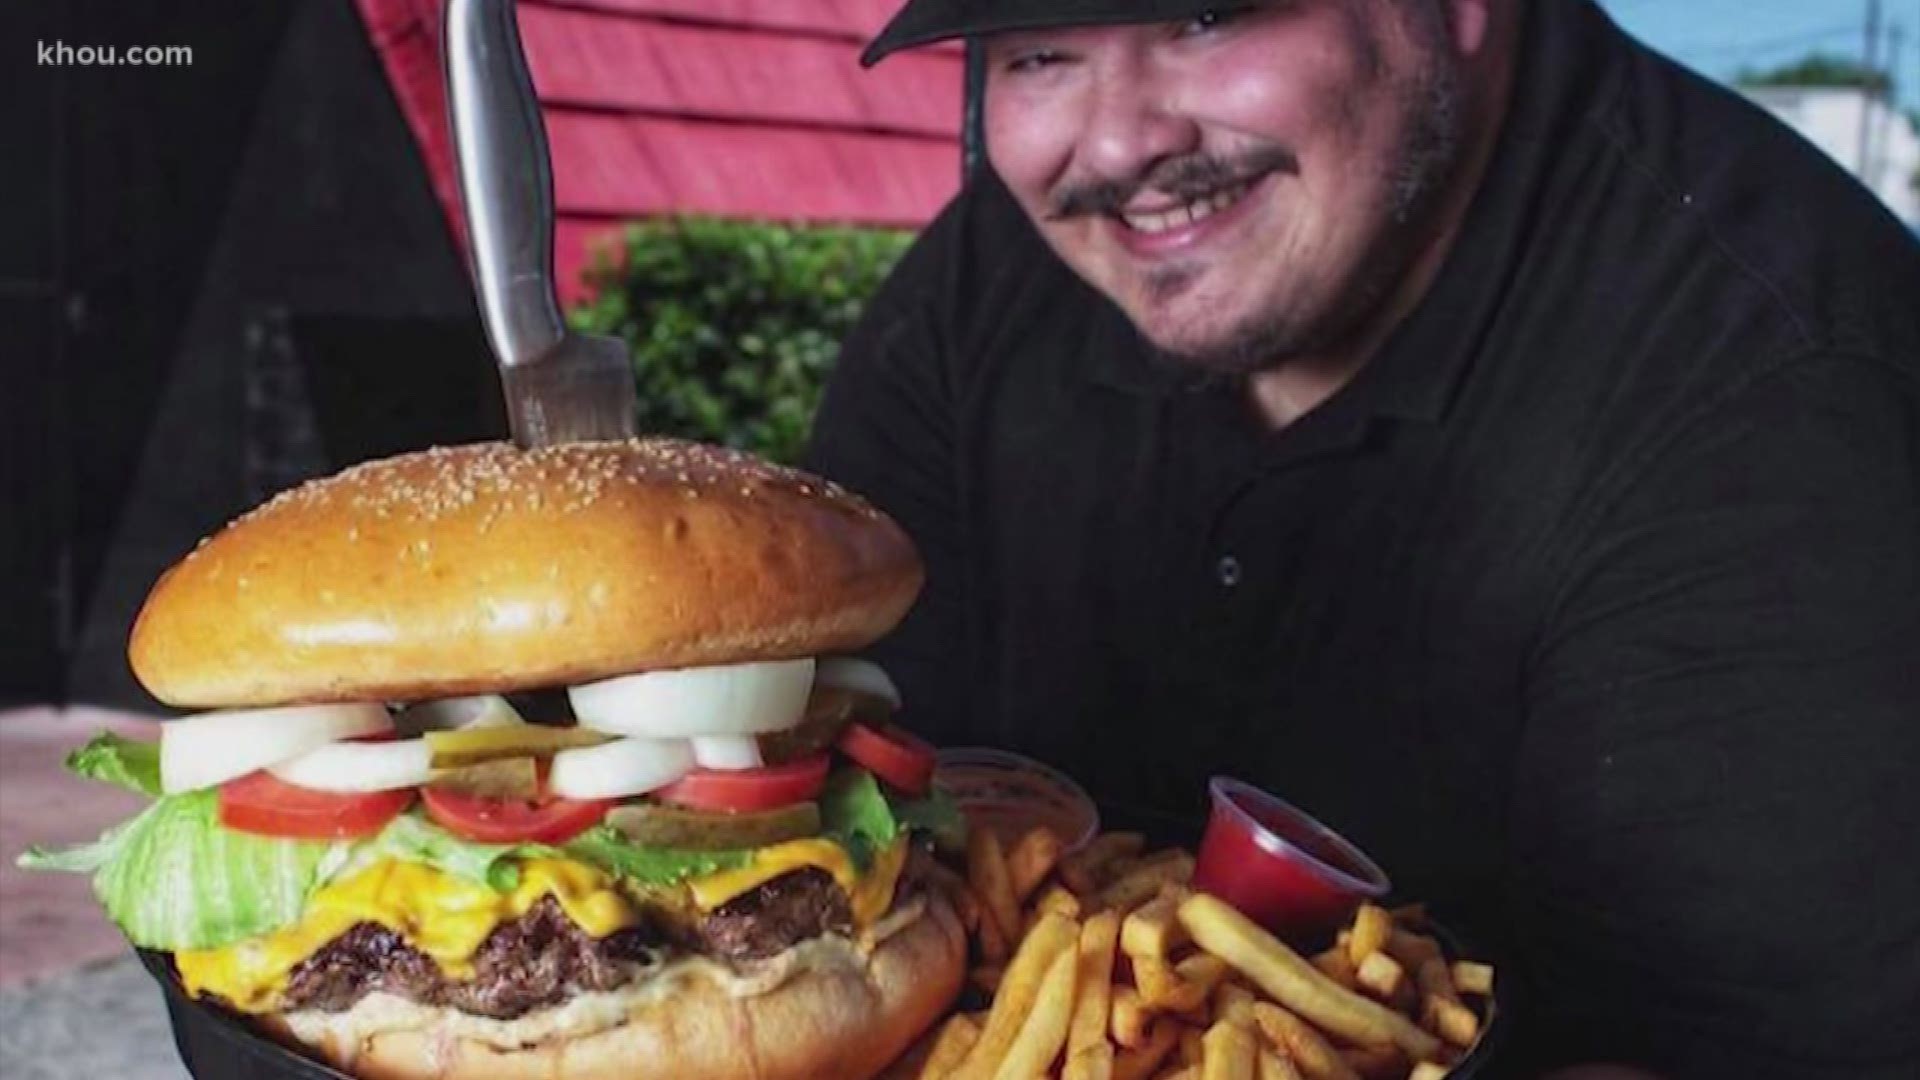 A Pasadena restaurant is challenging its customers with a giant burger equal to 18 McDonald’s Quarter Pounders! The Big Tex Super Burger features a 4.5-pound all-beef patty, 12 slices of cheese, pickles, lettuce, tomatoes, mayo and mustard. At $25, the hefty hamburger will take a bite out of your budget. But if you can gulp it down in an hour, it’s free. (18 Quarter Pounders would cost $68.22 so there's that.)